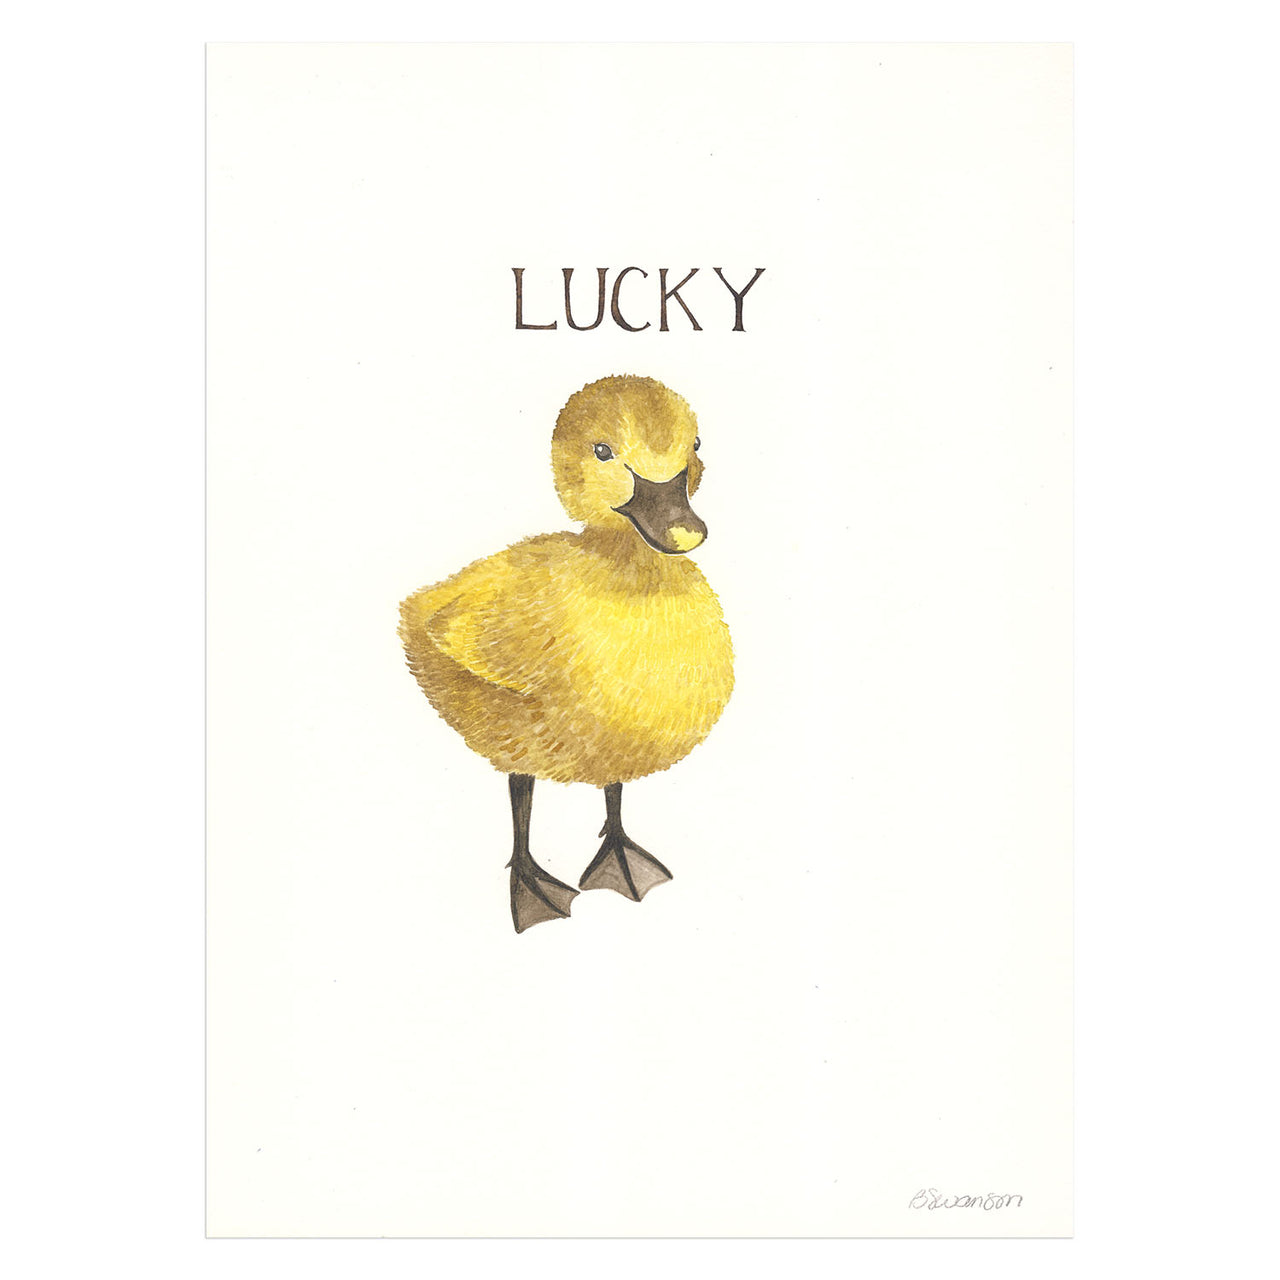 original watercolor painting of a yellow duckling, with lucky written above in ink